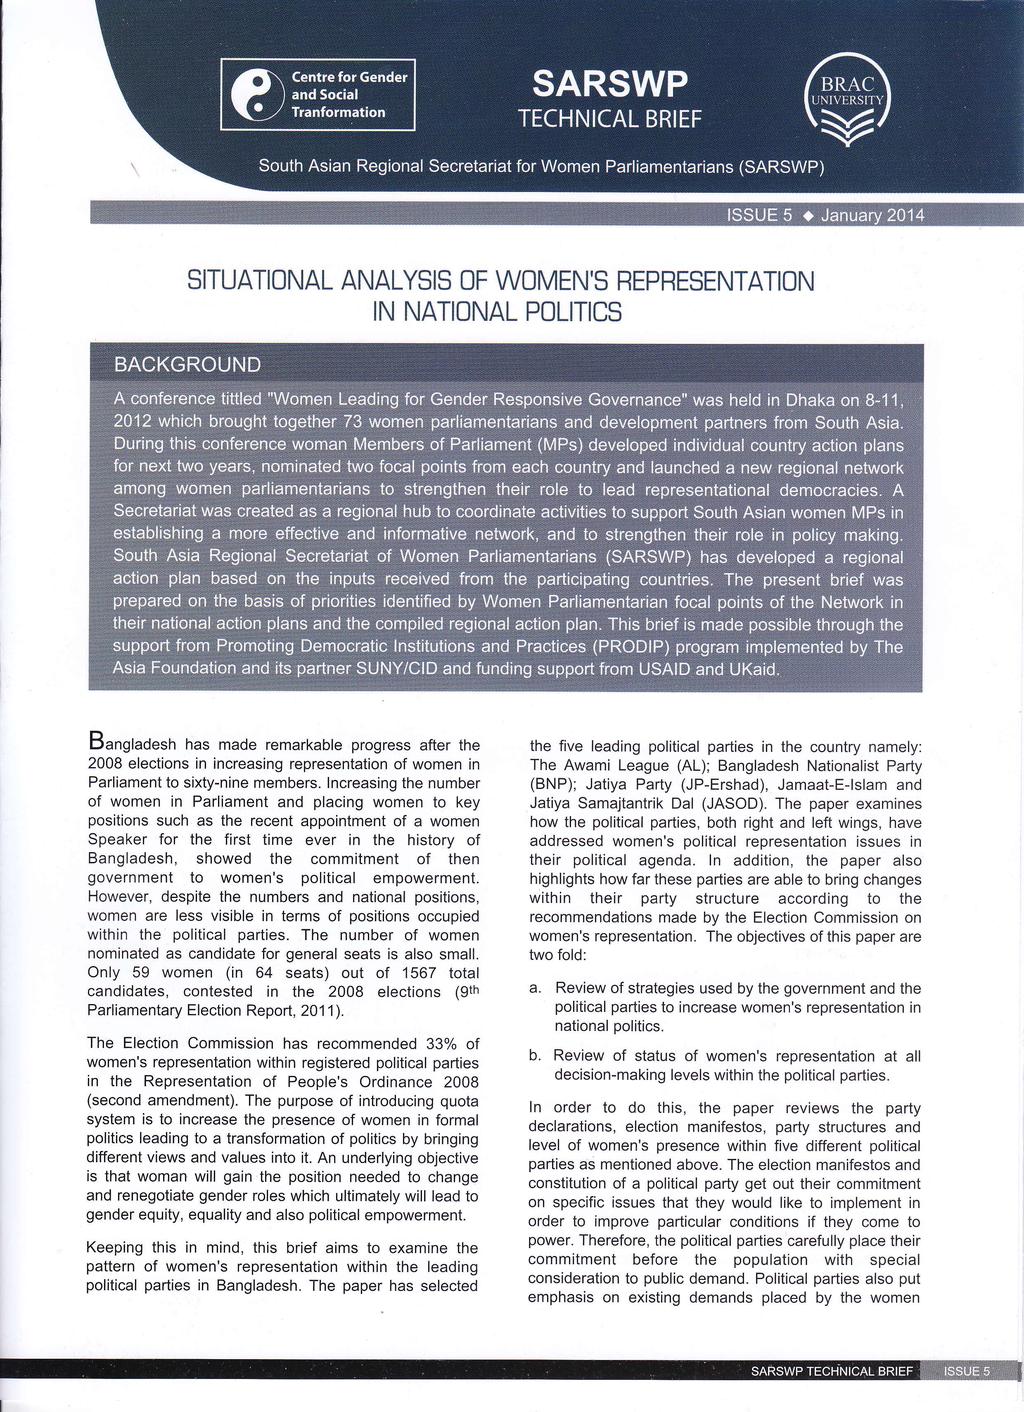 SITUATIONAL ANALYSIS OF WOMEN'S REPRESENTATION IN NATIONAL POLITICS Bangladesh has made emakable pogess afte the 2008 elections in inceasing epesentation of women in Paliament to sixty-nine membes.